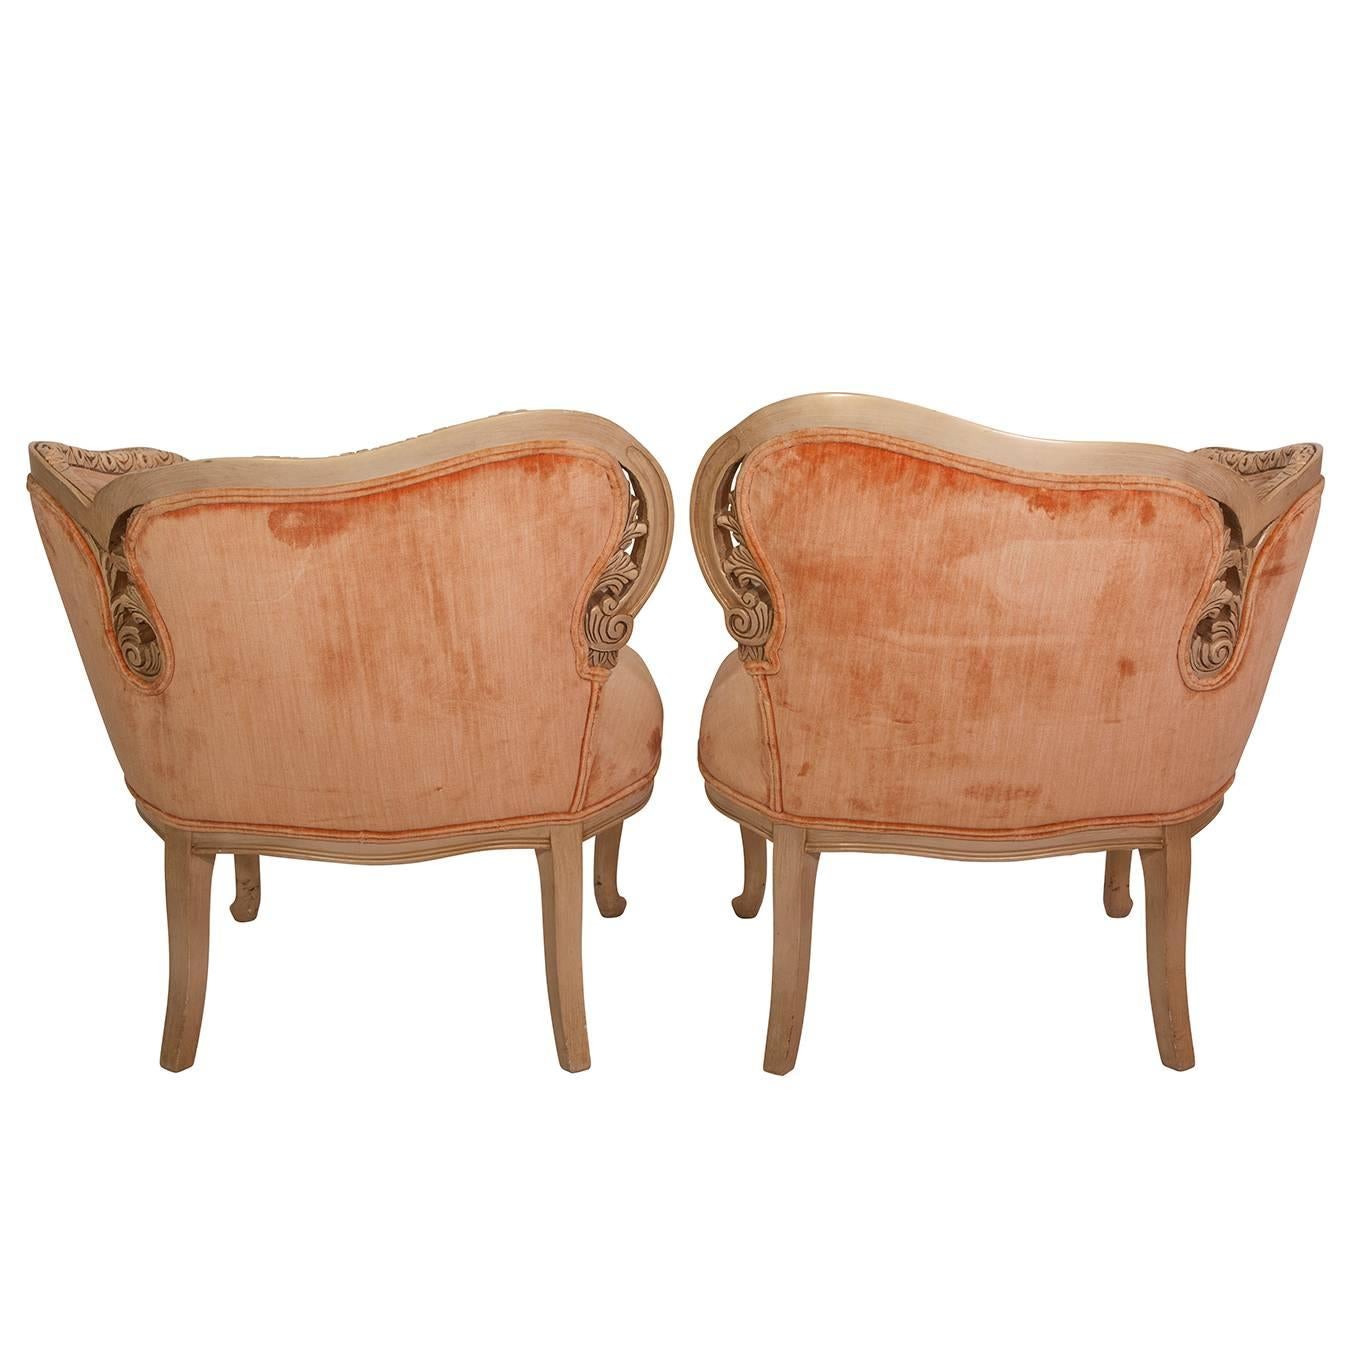 19th century tufted French side chairs in coral velvet.